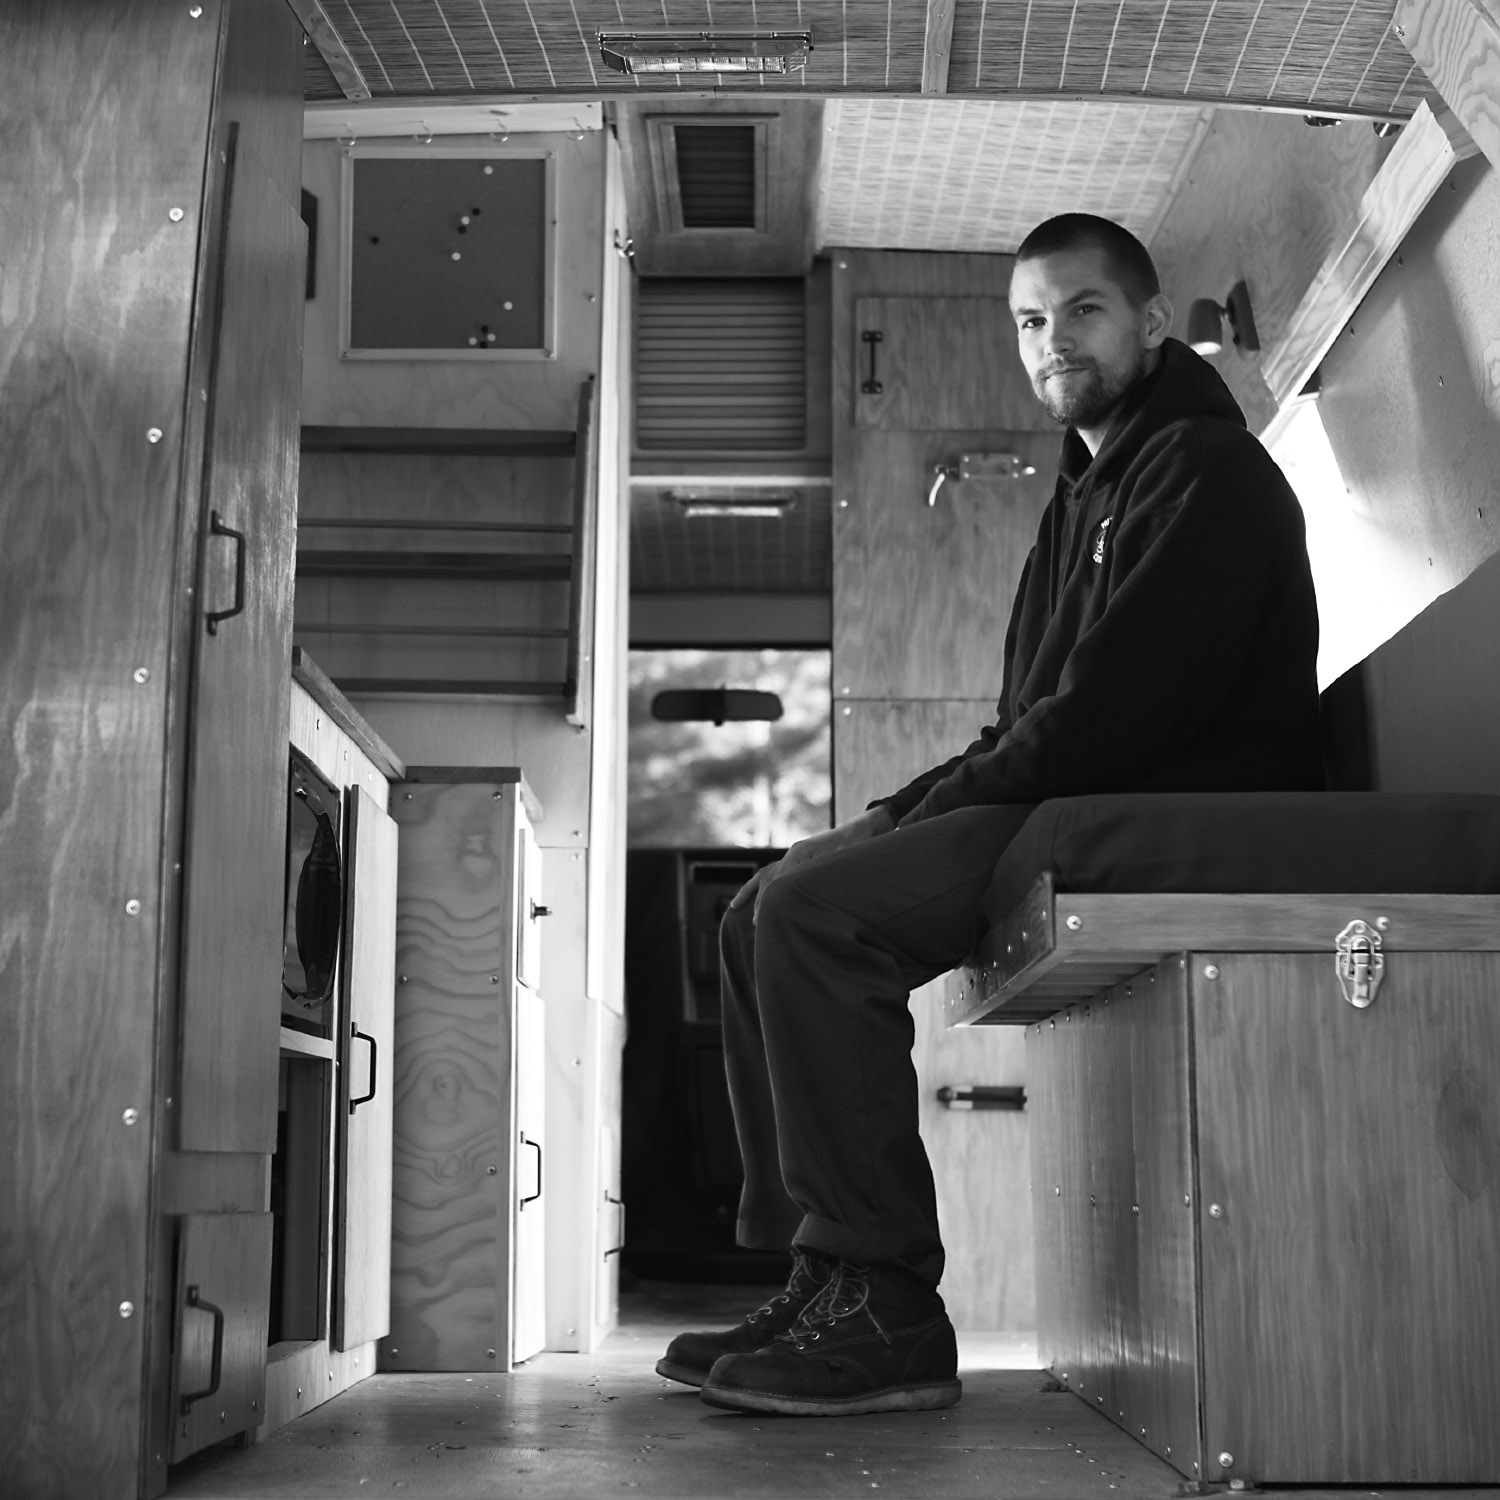  Jeff Hill has spent the past year gutting and rebuilding the interior of his van, making it his home. He has lived out of it in San Francisco for a year, traveling back and forth from California to&nbsp;Massachusetts. Check out his site   hilltoppro